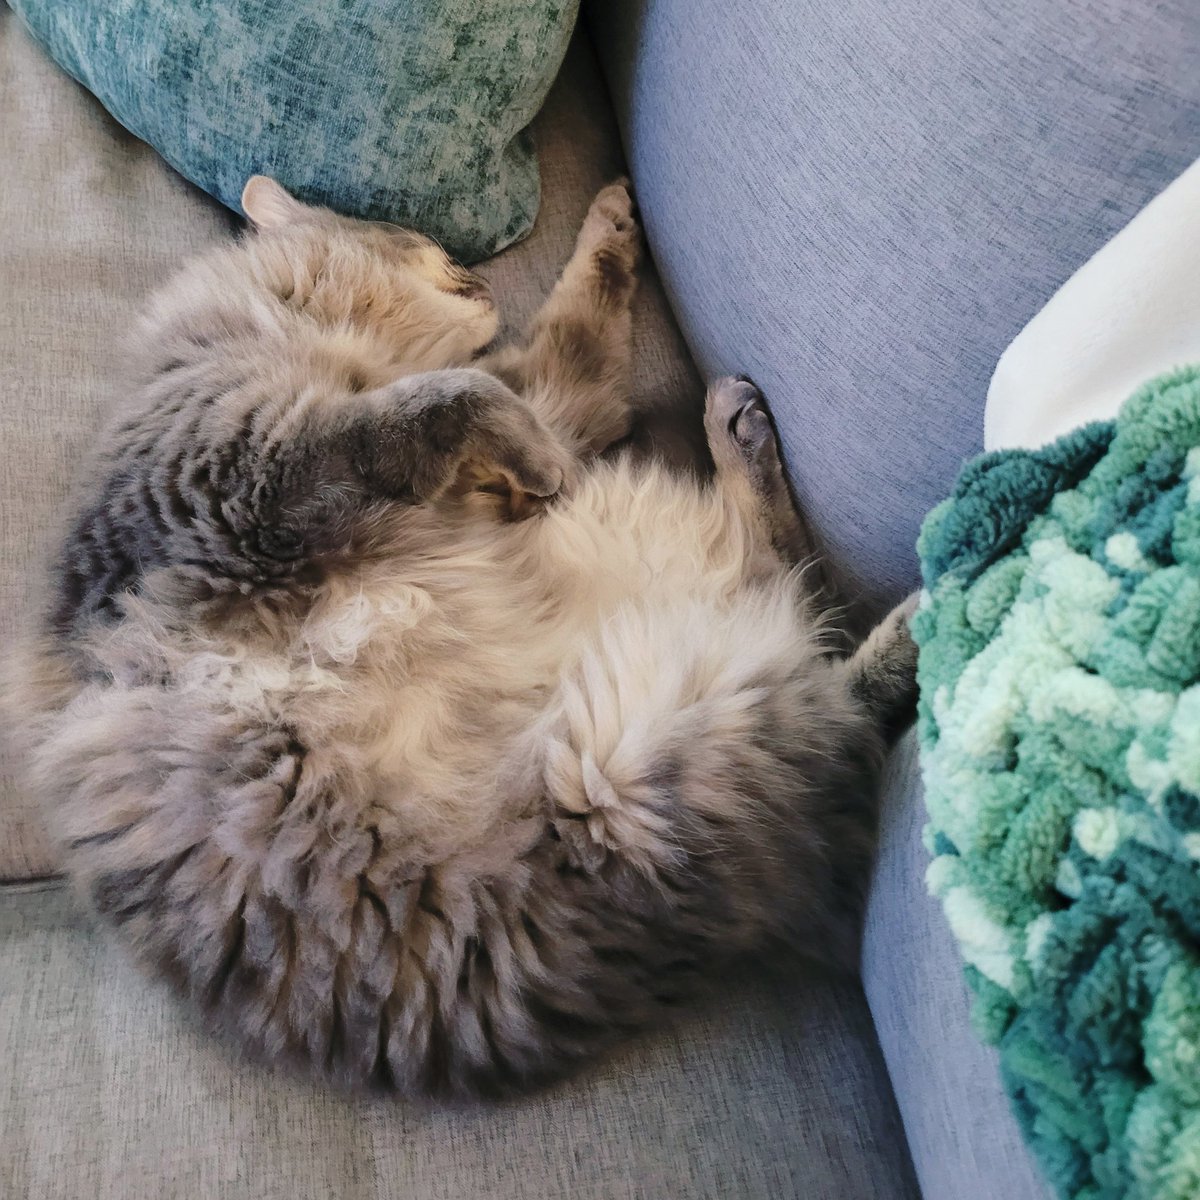 Gonna miss OPLive this weekend, but you know, OPie really needed a break. He's exhausted. 

🇺🇲Y'all have a great weekend and 4th!

#OPLiveKitty #OPLive #OPNation #OPLiveNation #REELZonPeacock